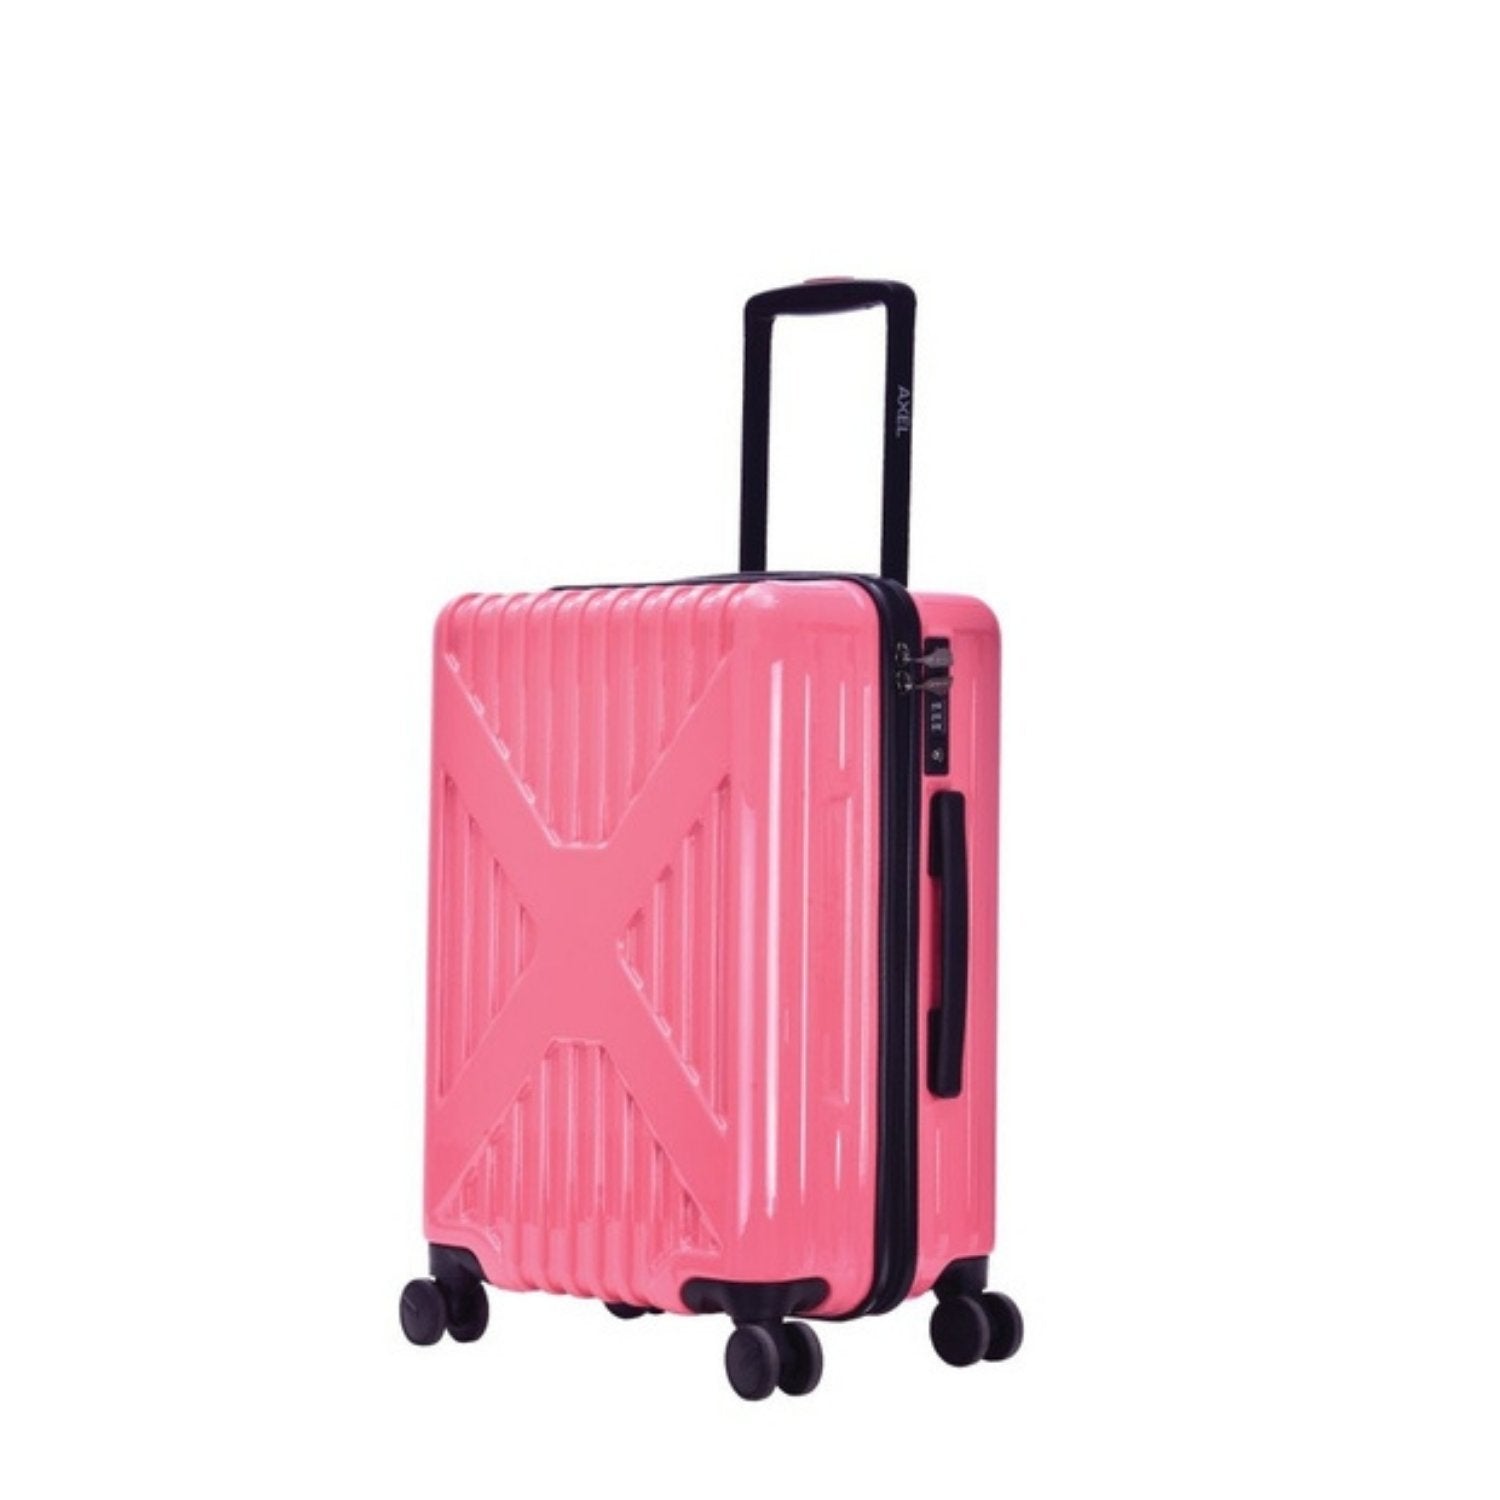 Lushberry Axel Collection Dove Pink Cabin - MOON - Luggage - Lushberry - Lushberry Axel Collection Dove Pink Cabin - Luggage - 4